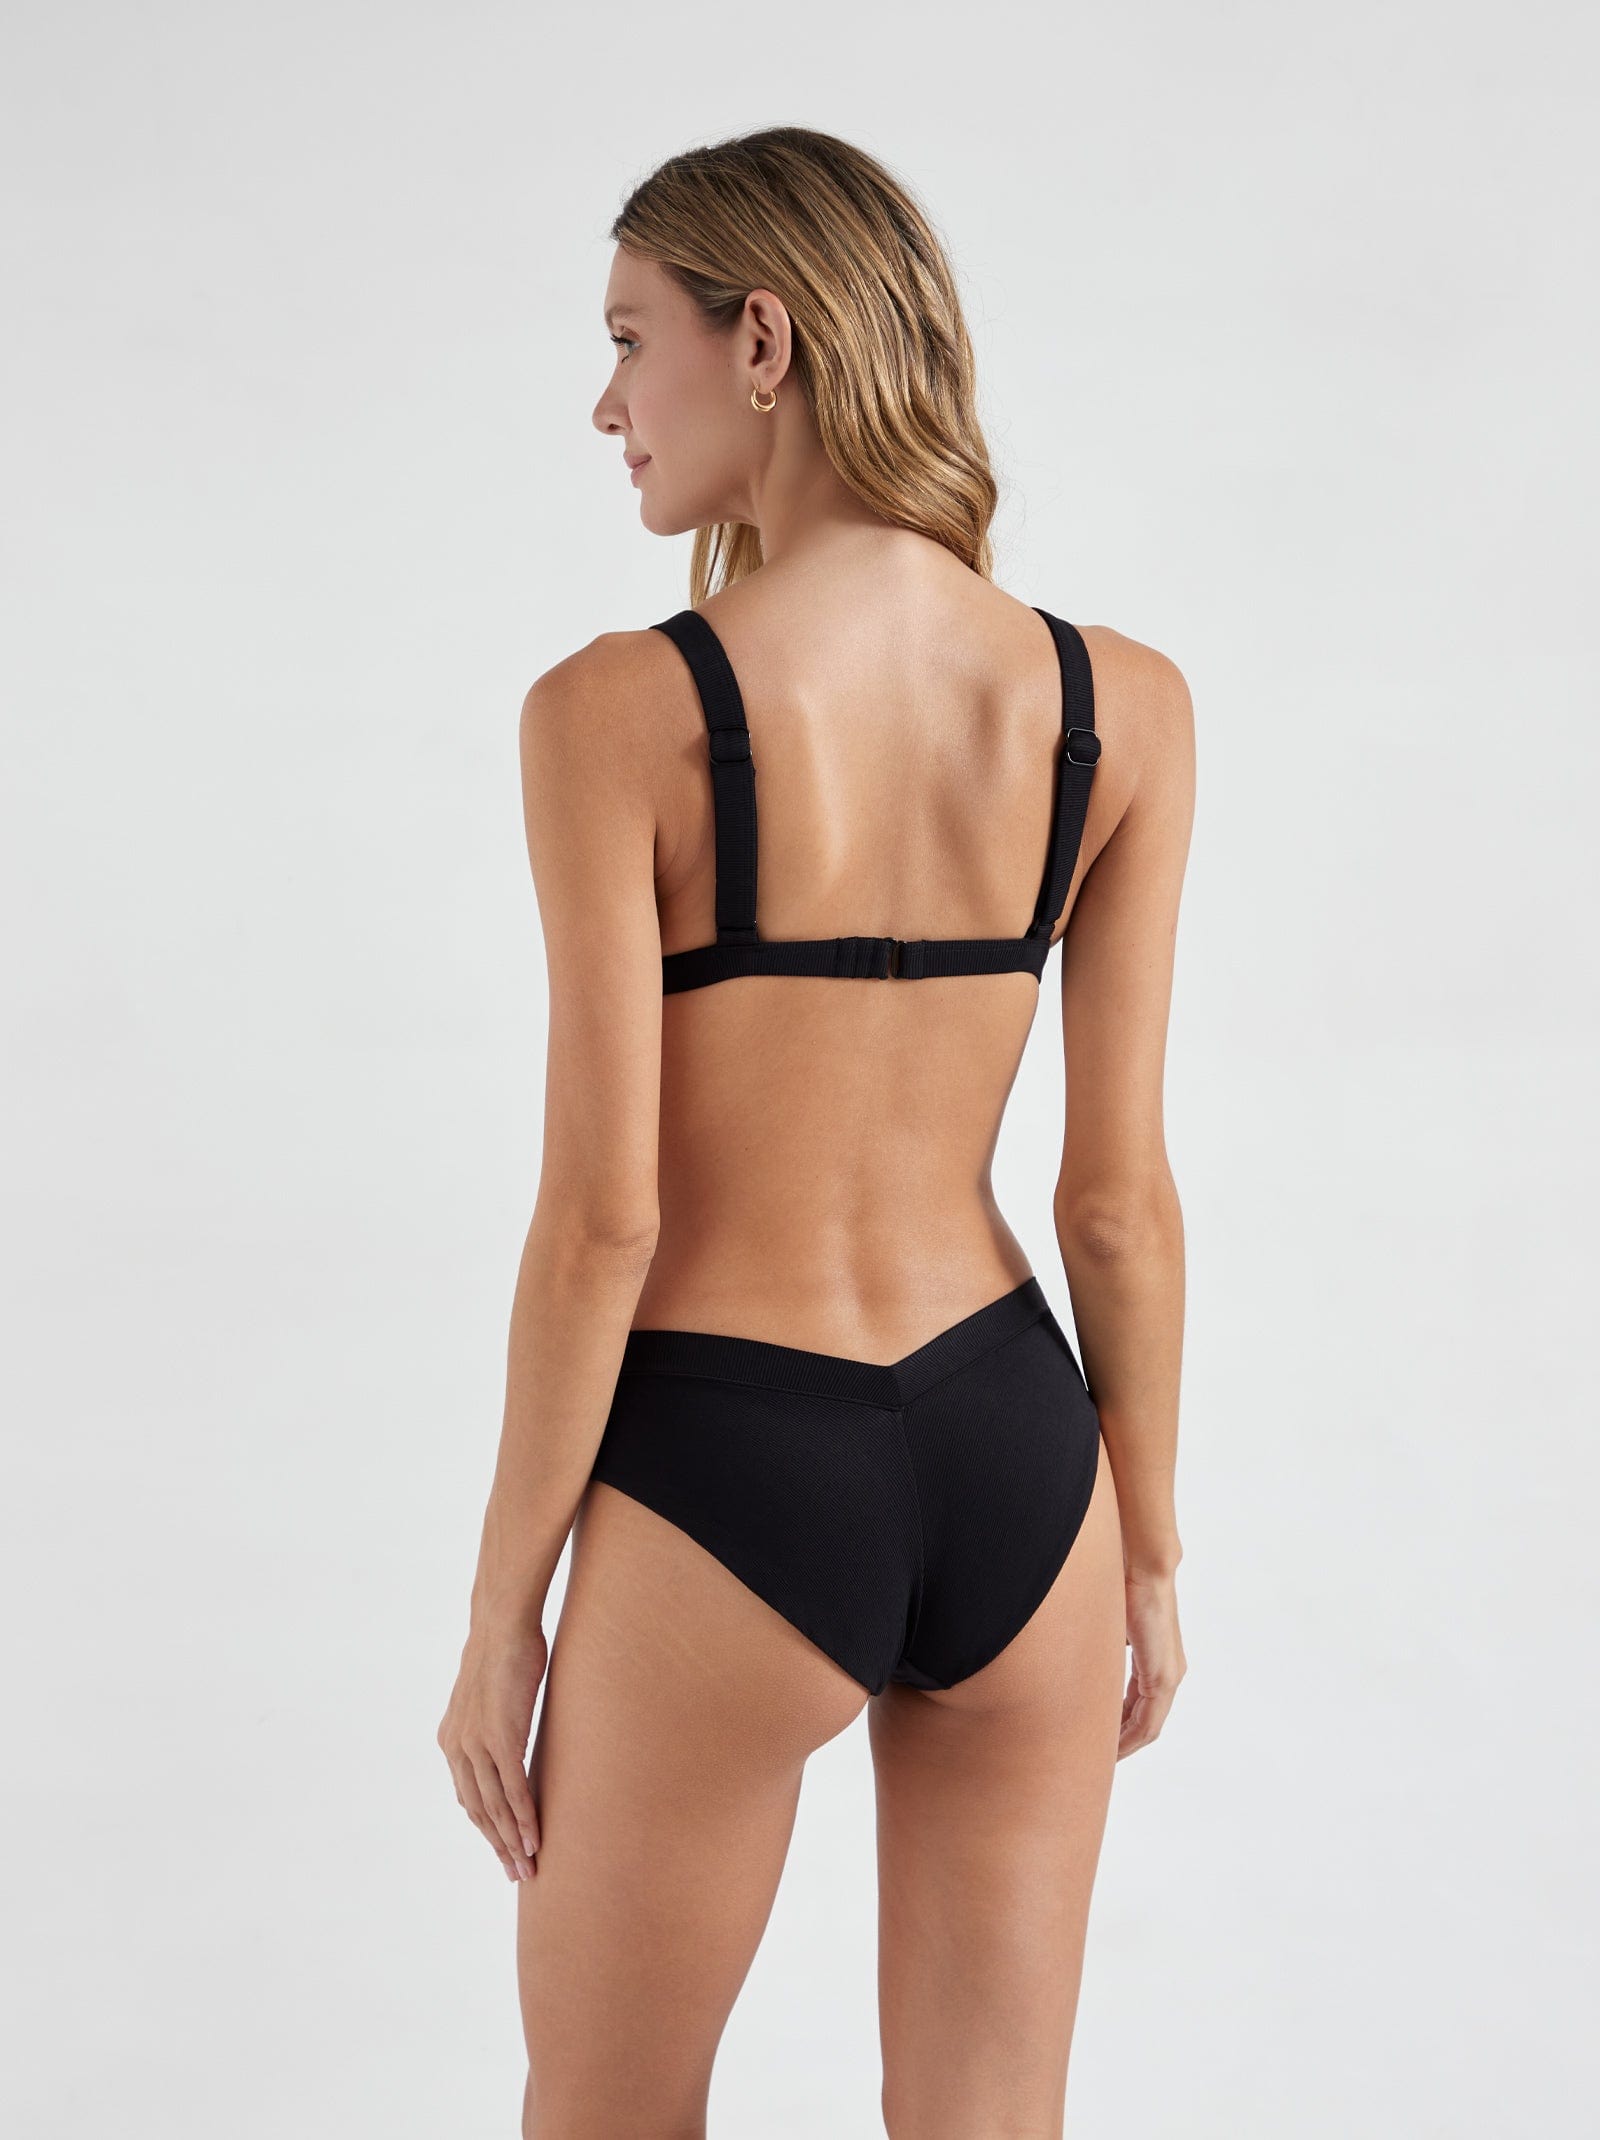  ONEONE Women's Full Coverage Swimsuit Jesse High Cut